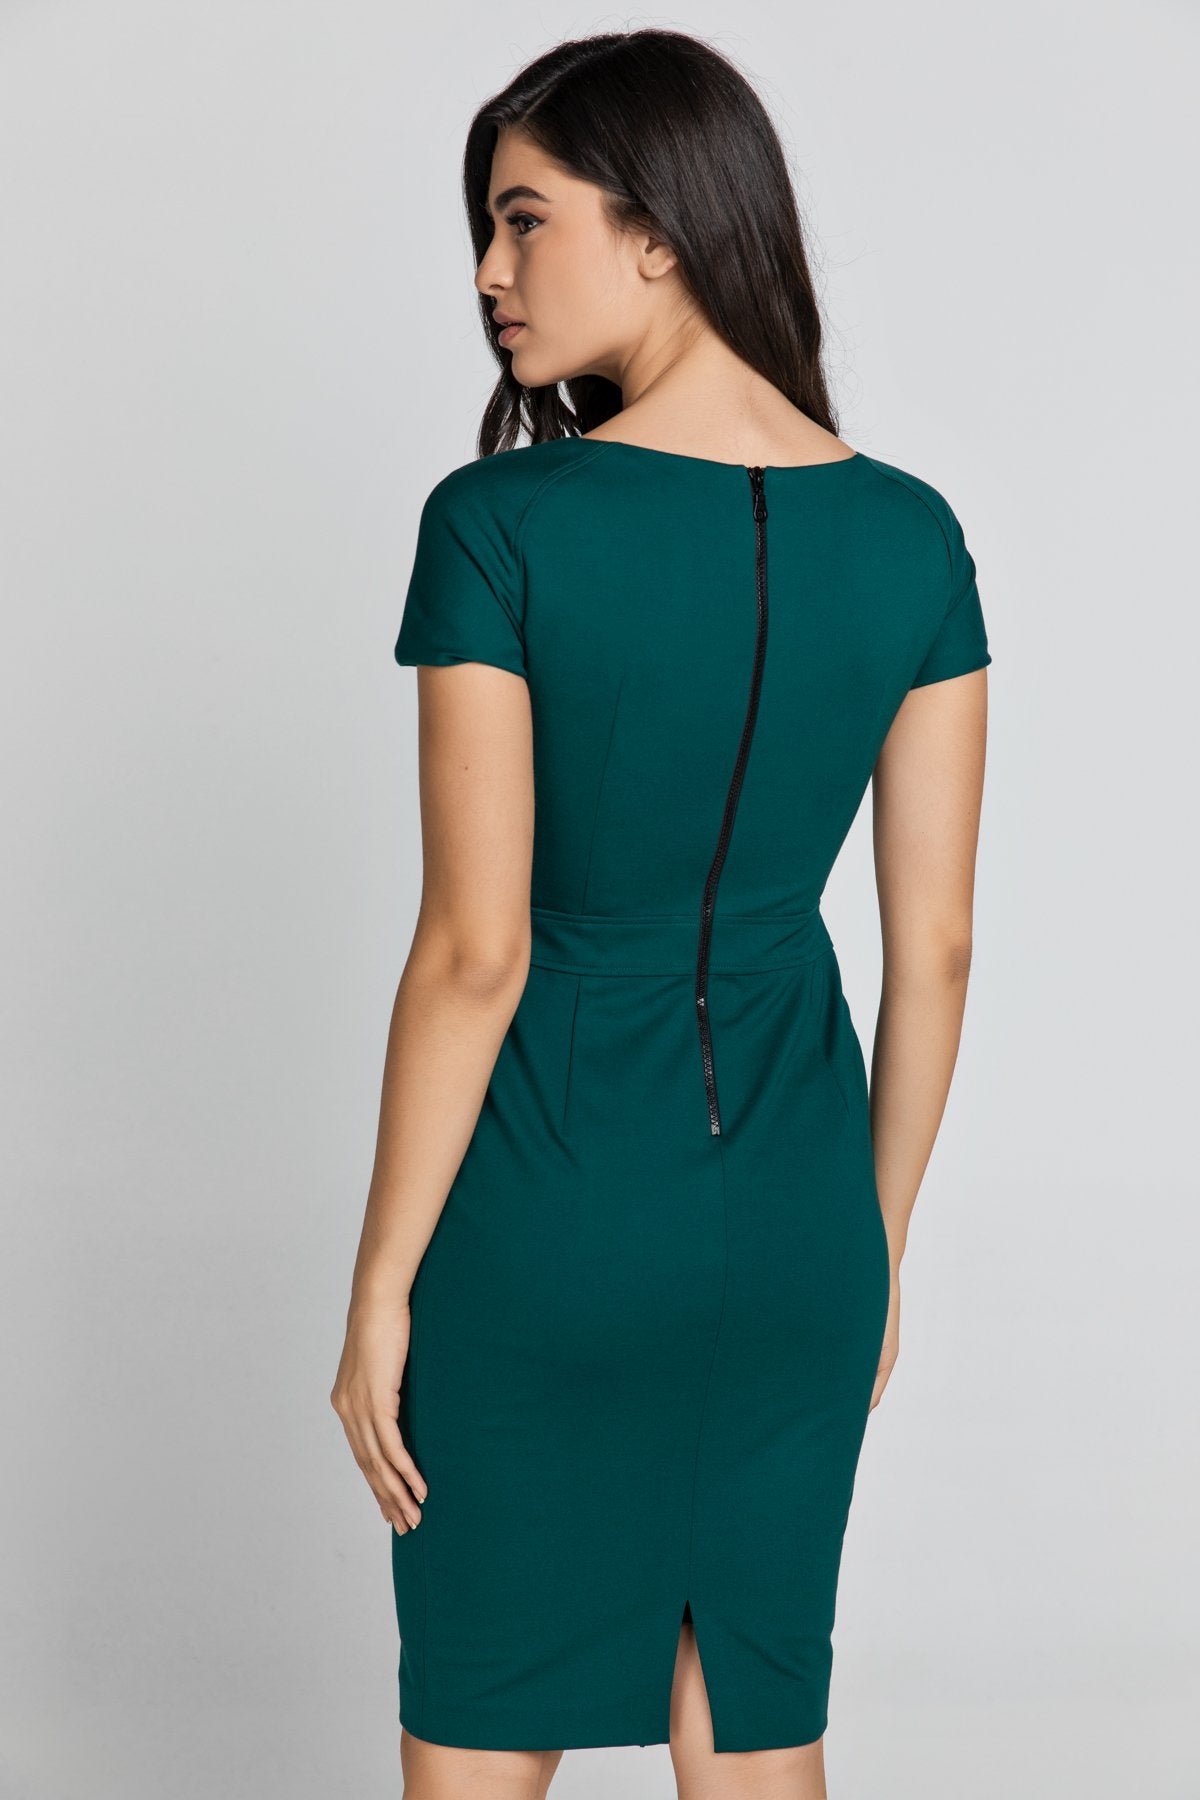 Fitted Emerald Cap Sleeve Dress